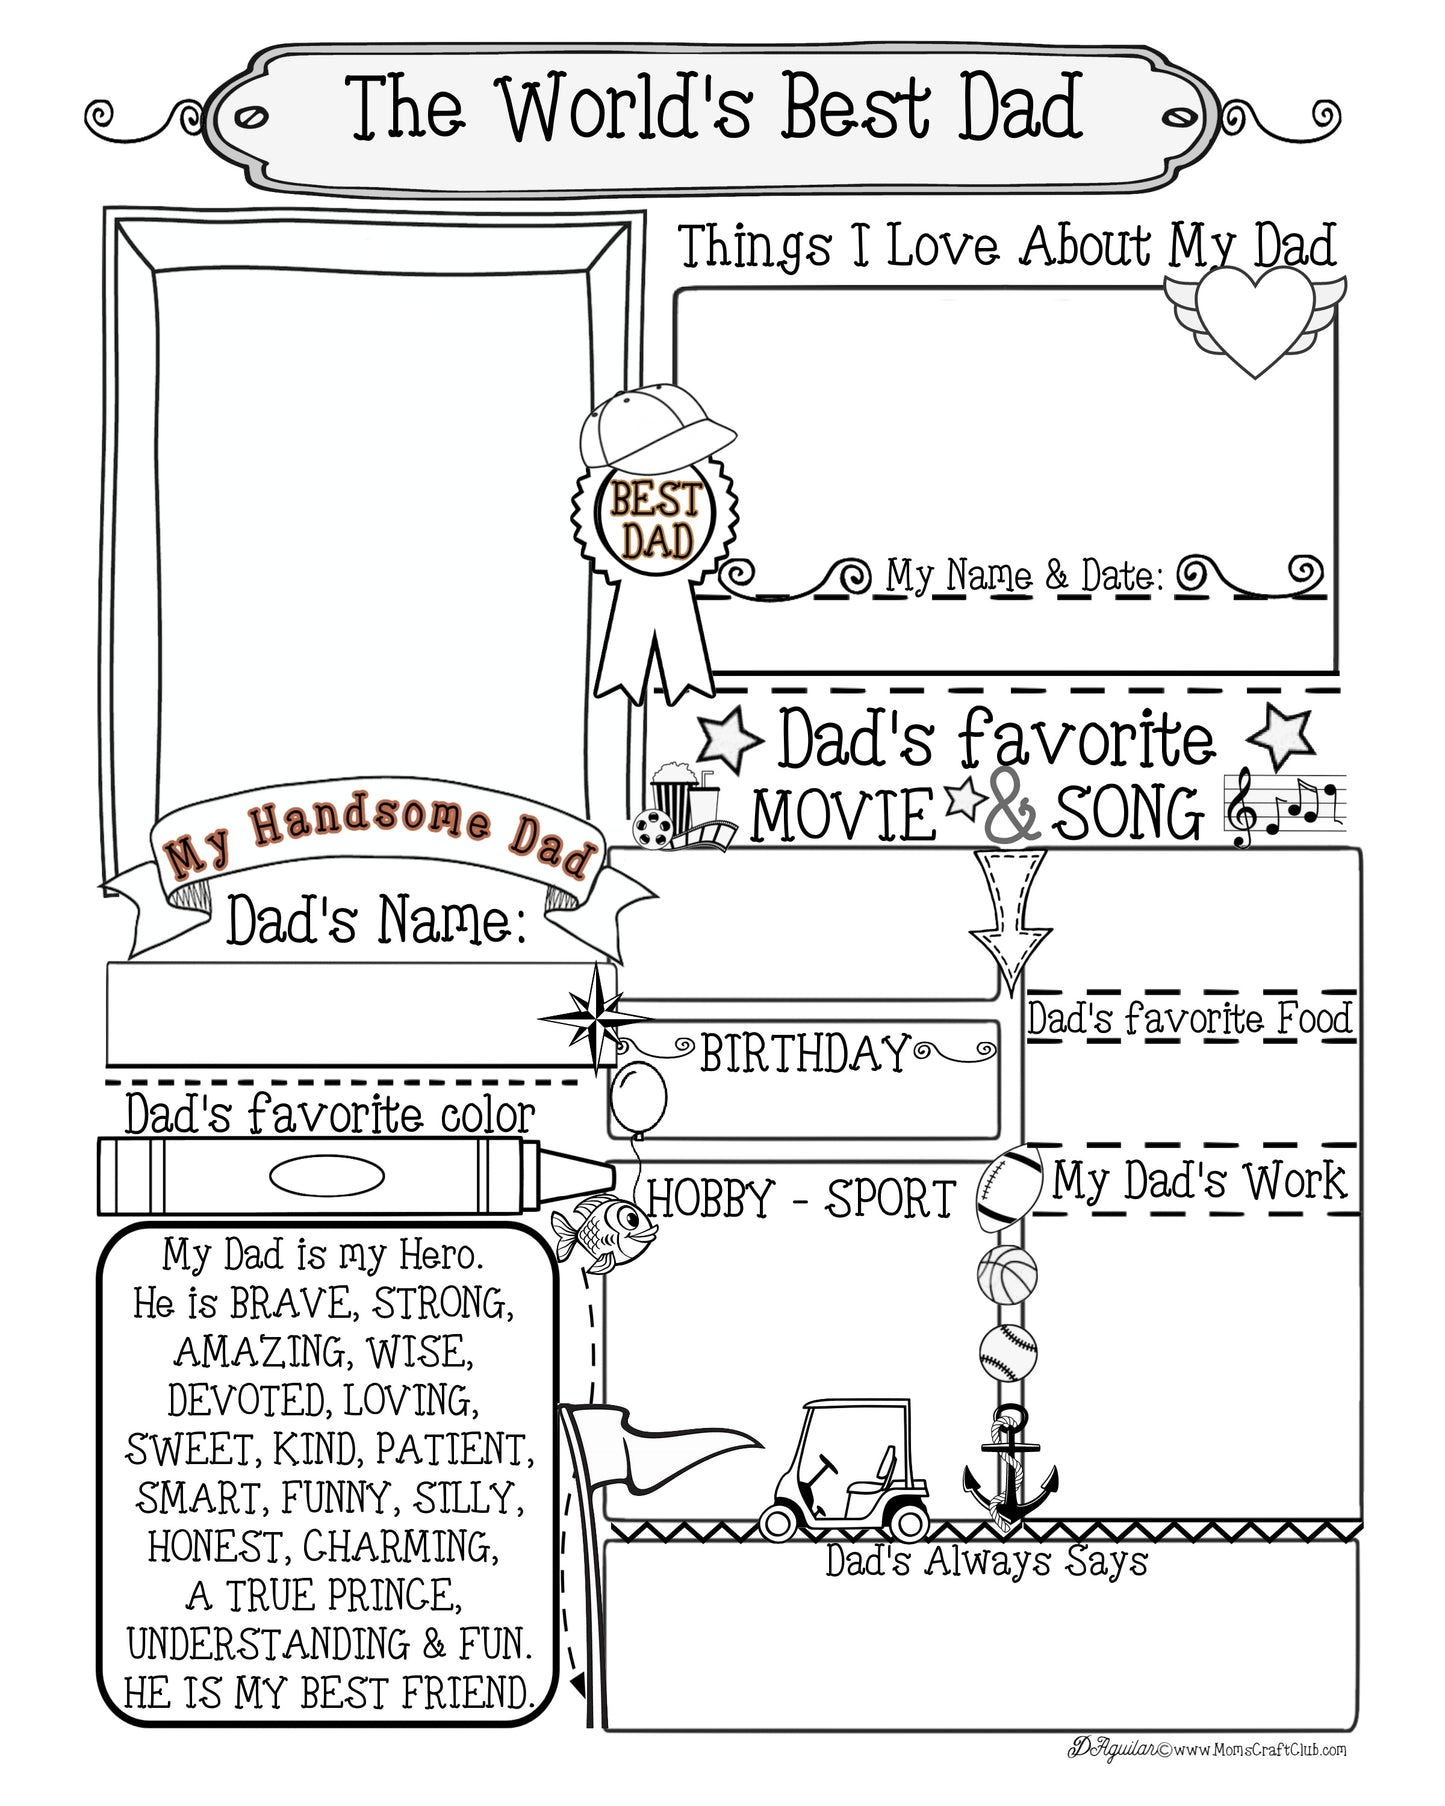 Best Dad - All About My Dad Coloring Page - Craft - Gift -8x10 Frame Ready